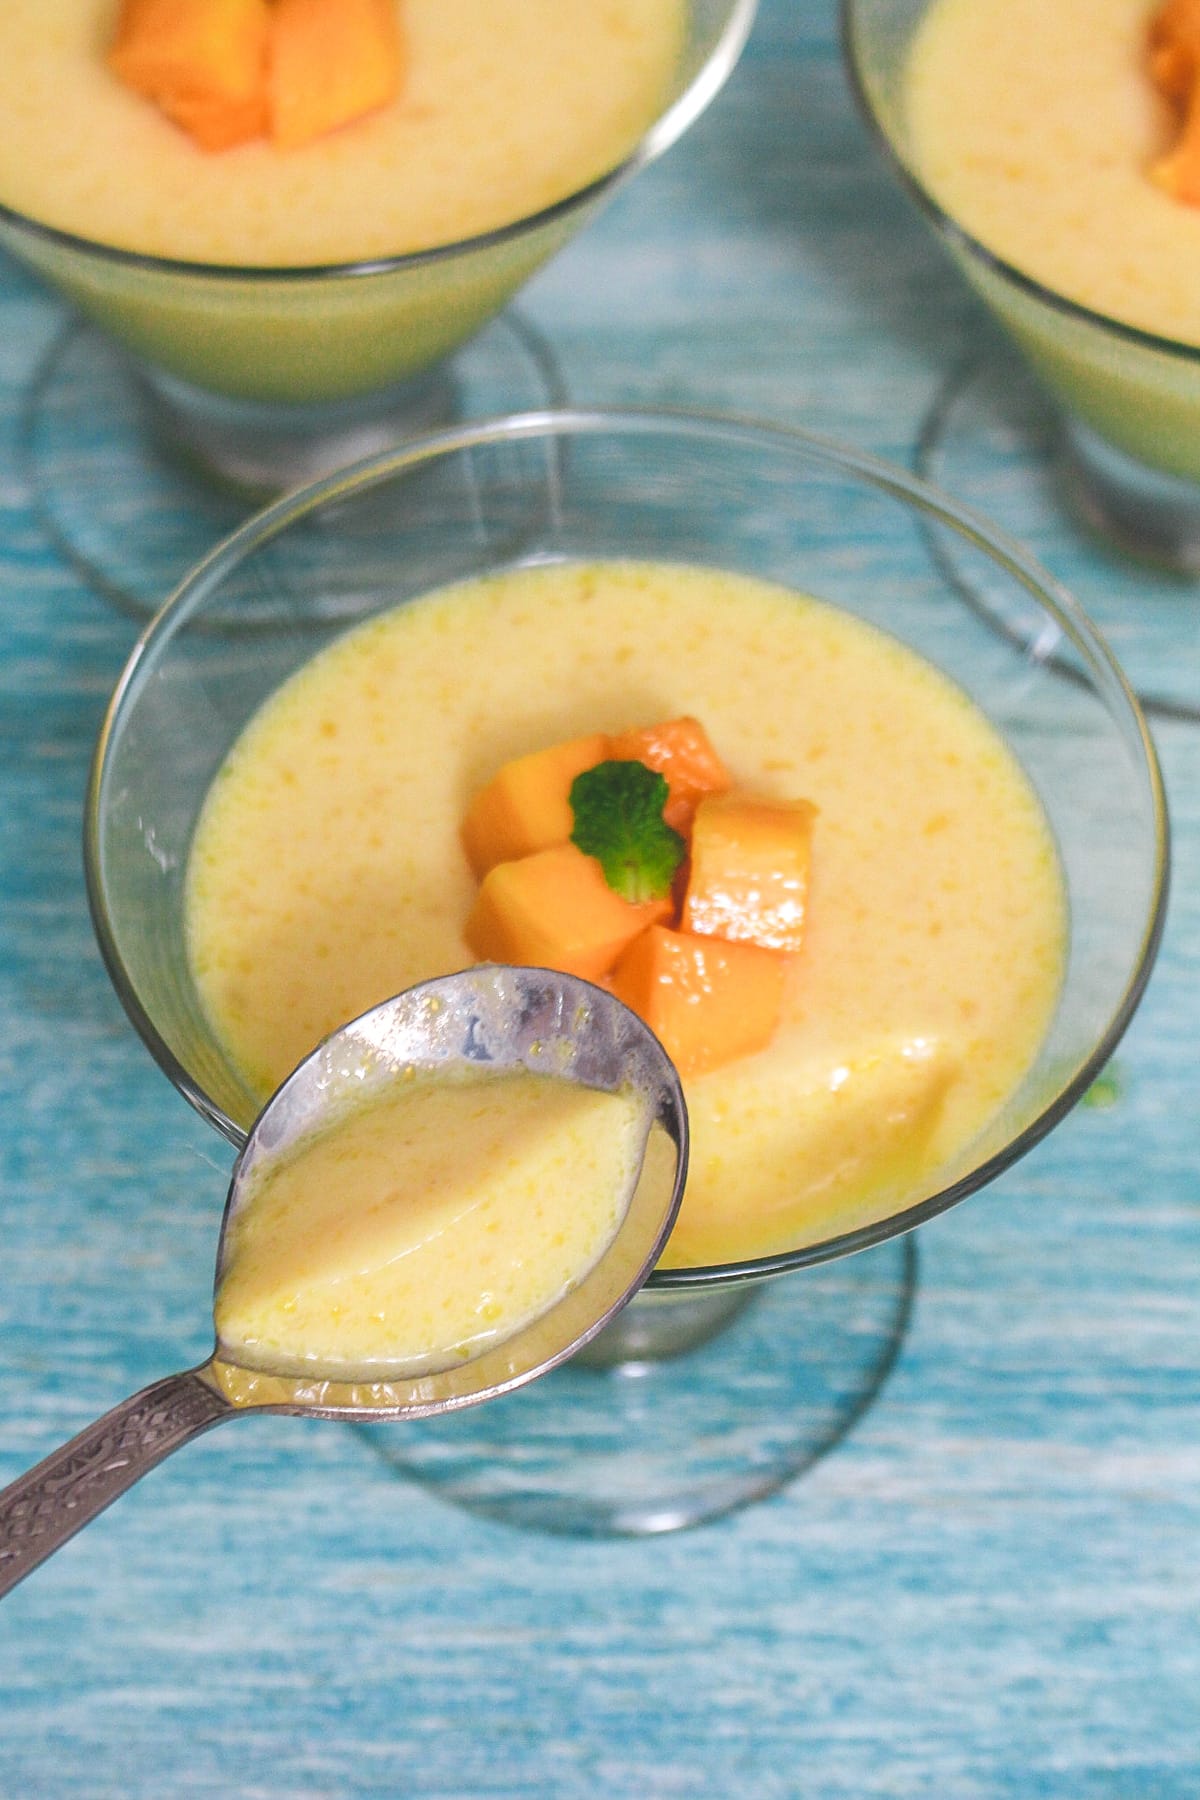 A spoonful of mango pudding taken from the bowl to show texture.